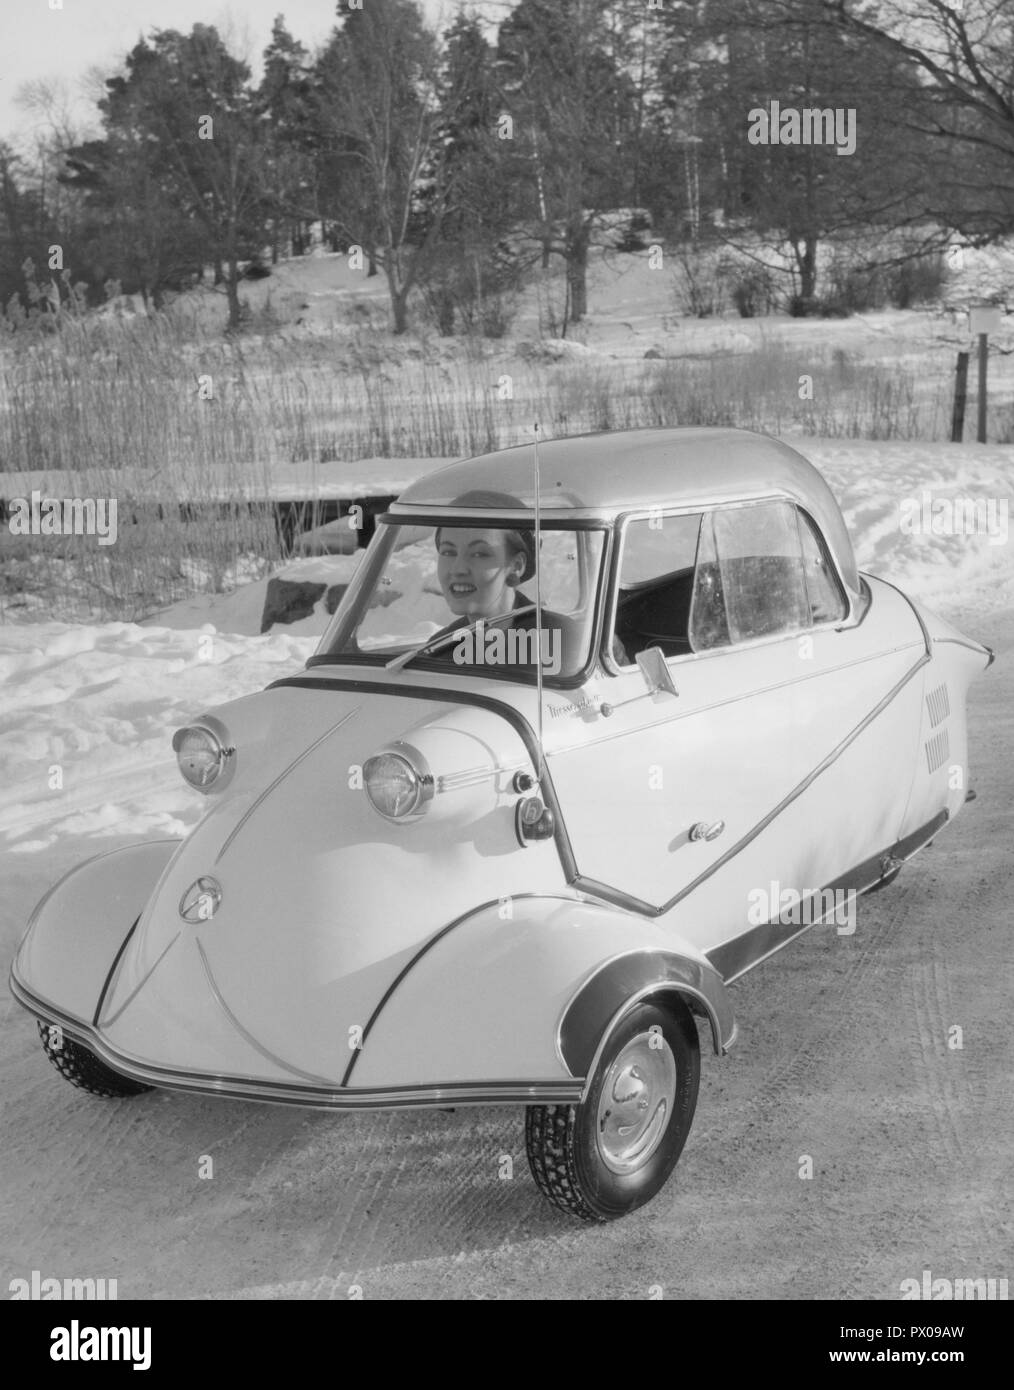 Winter driving in the 1950s. A young woman is driving the german microcar Messerschmitt KE200. A three wheel small car with enough room to fit two grownups and one child in the car. The car was manufactured between 1955-1964. Sweden 1955 Stock Photo